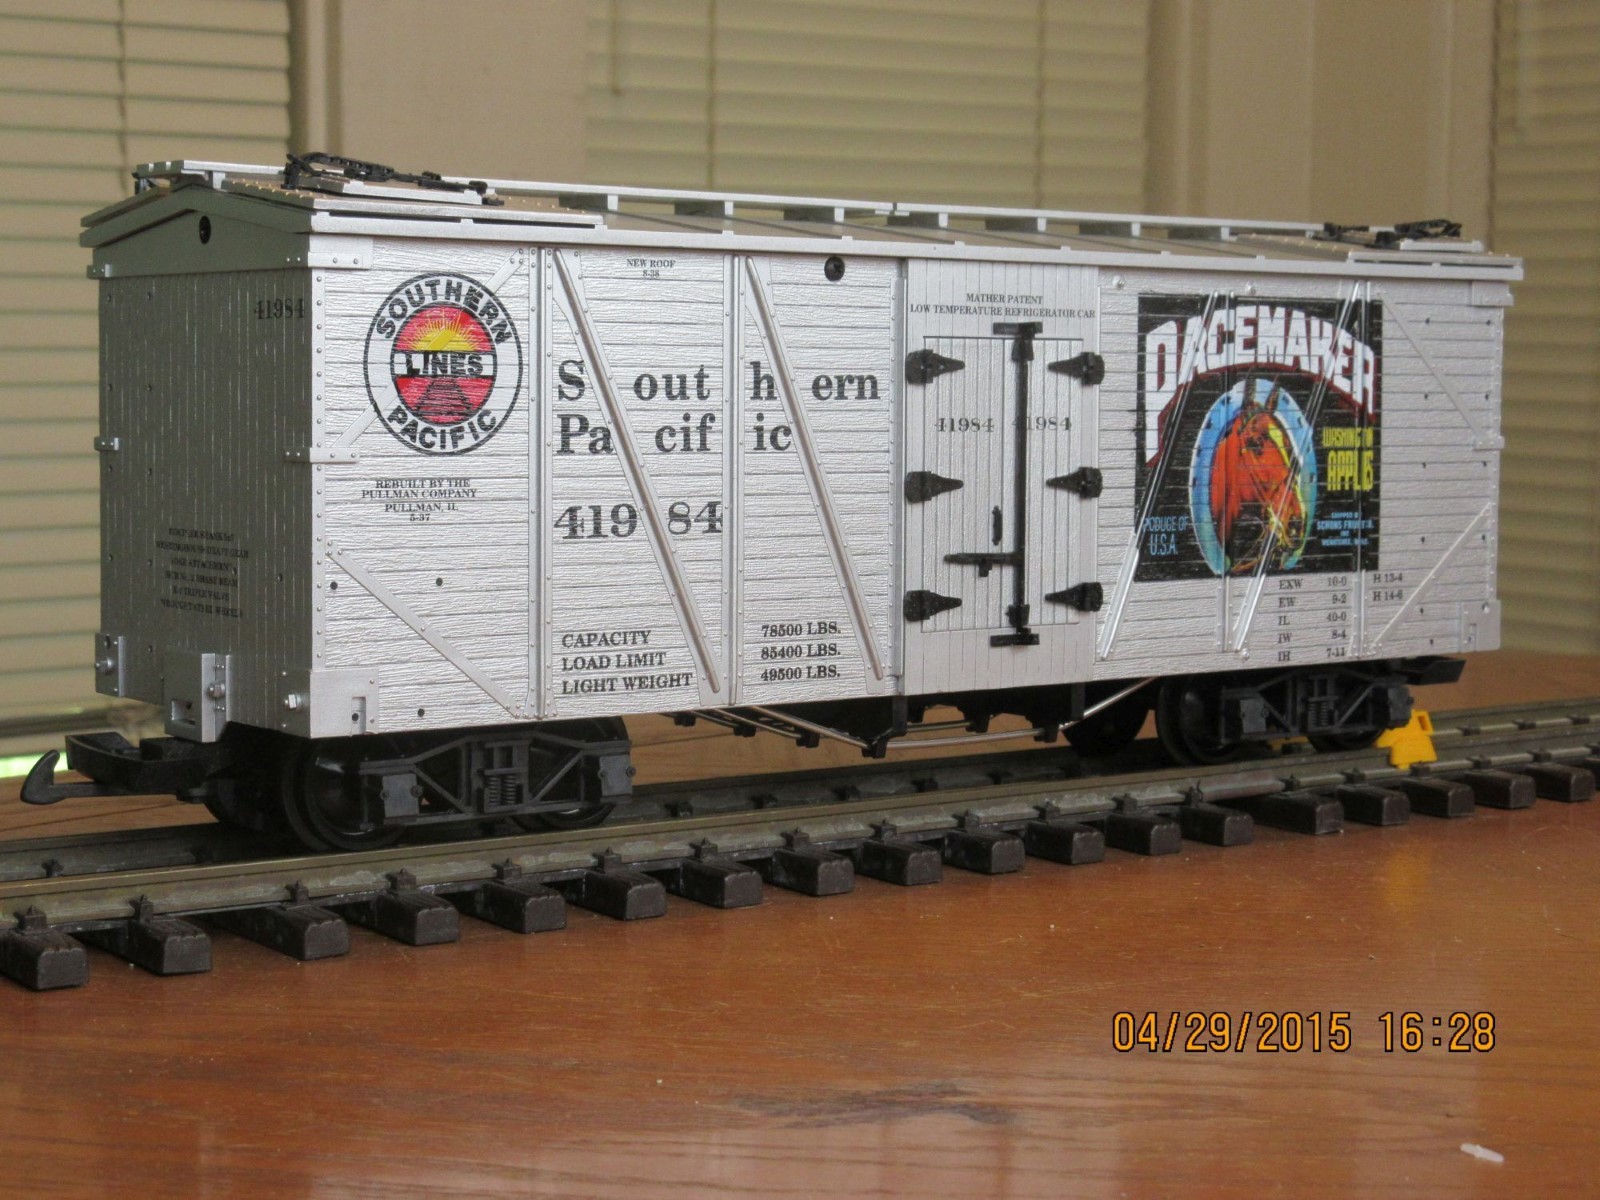 R15026B Southern Pacific Spacemaker Apples SP 41984